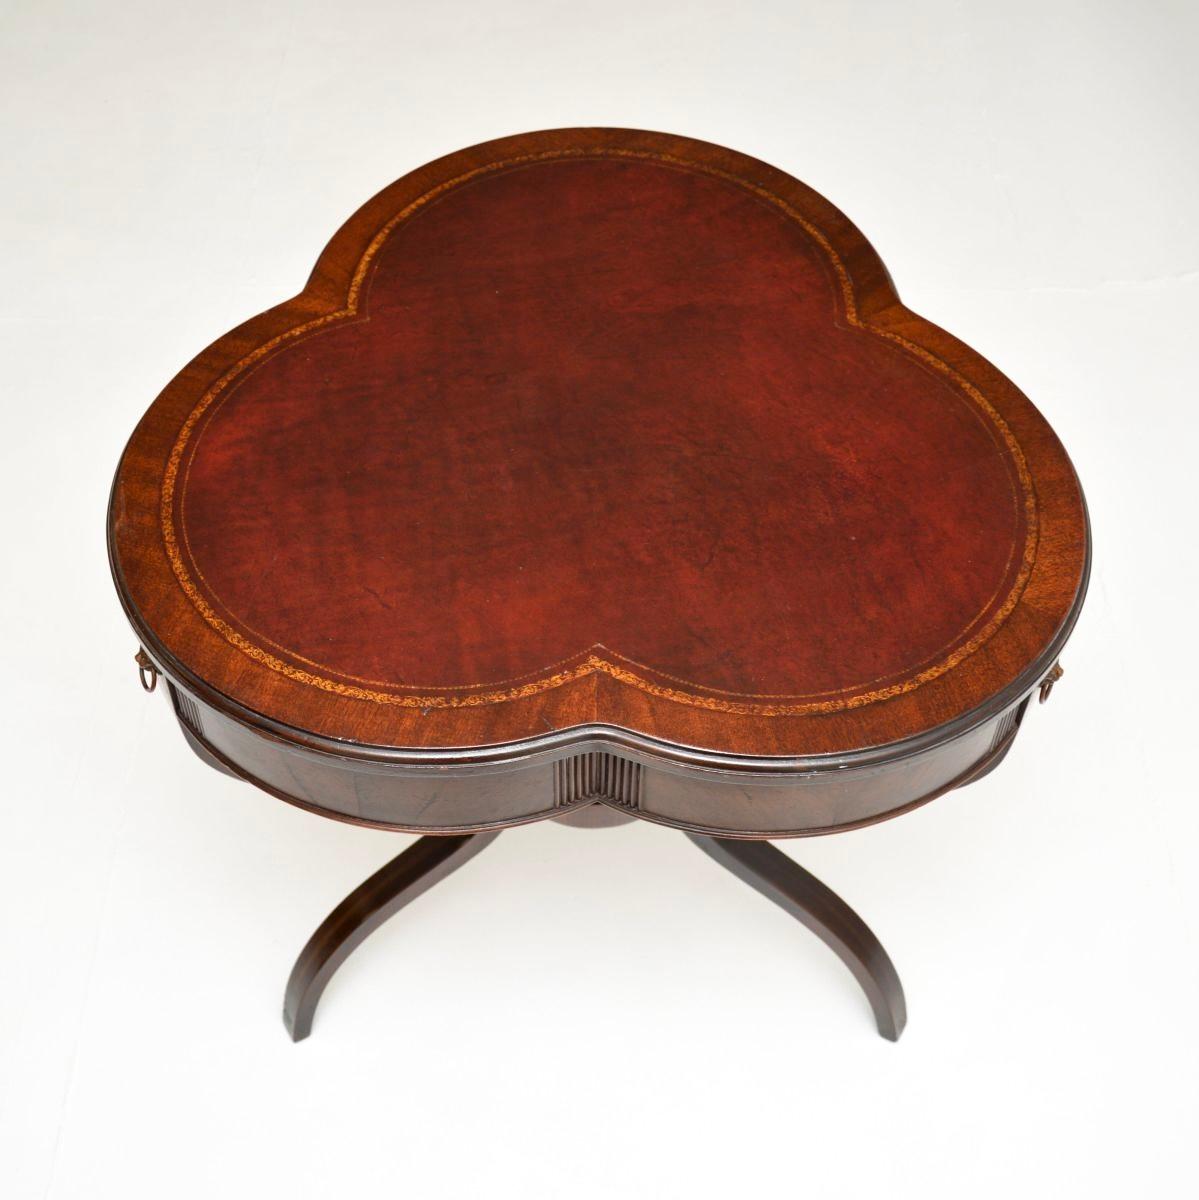 A beautiful and quite unusual antique leather top occasional table. This was made in England, we would date it to around the 1920-30’s.

It is of superb quality and has a lovely clover shaped design to the top. The top has an inset burgundy leather